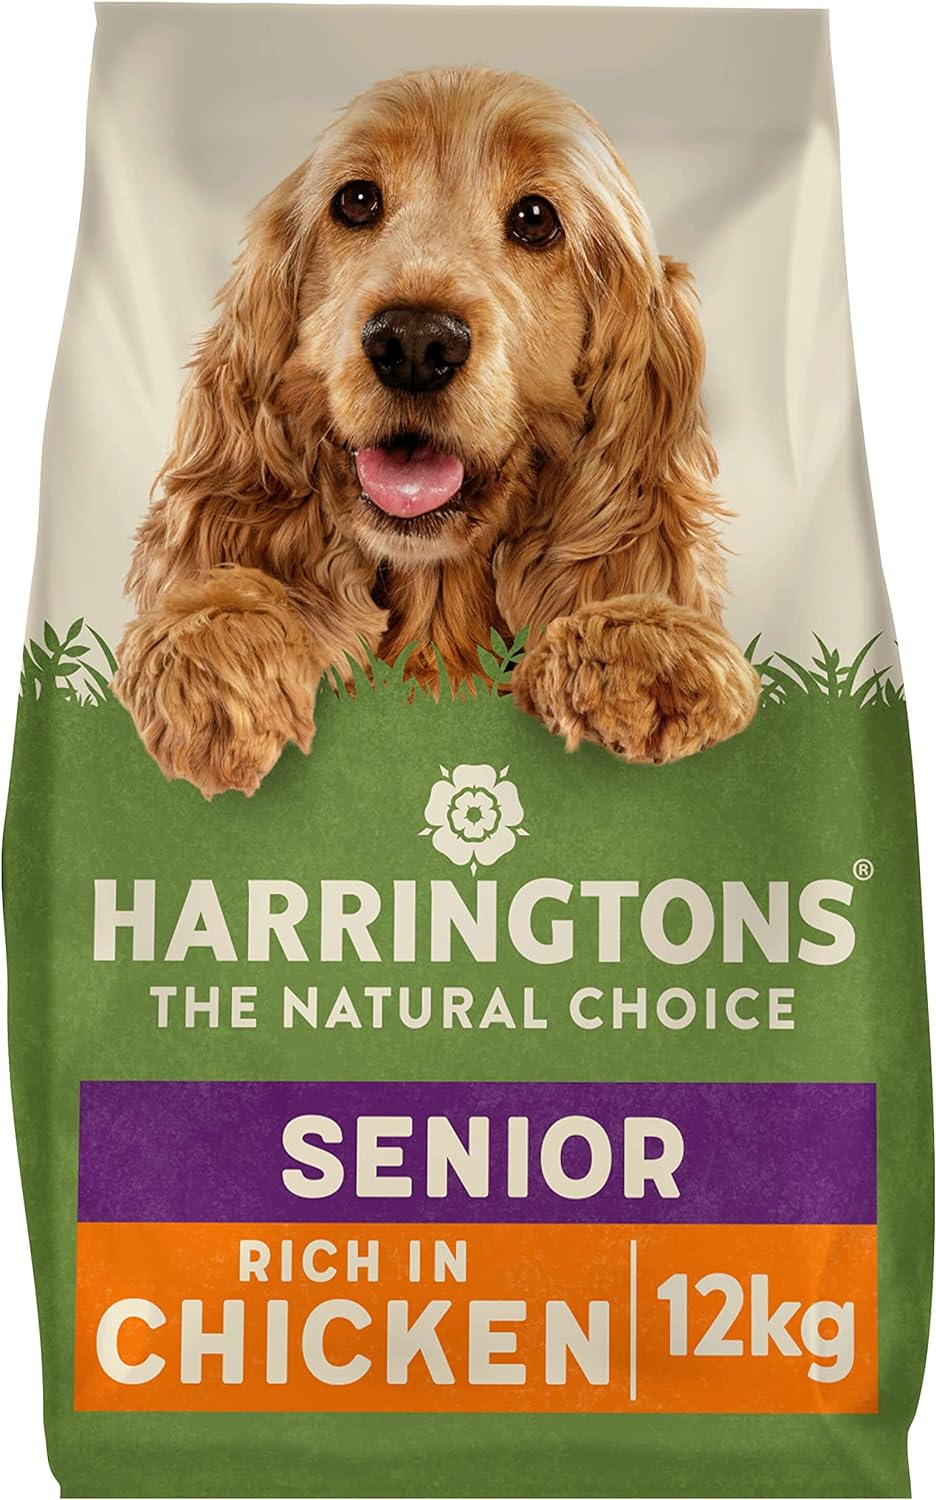 Harringtons Senior Complete Dry Dog Food Chicken & Rice 12kg - Made with All Natural Ingredients?HARRSENC-12